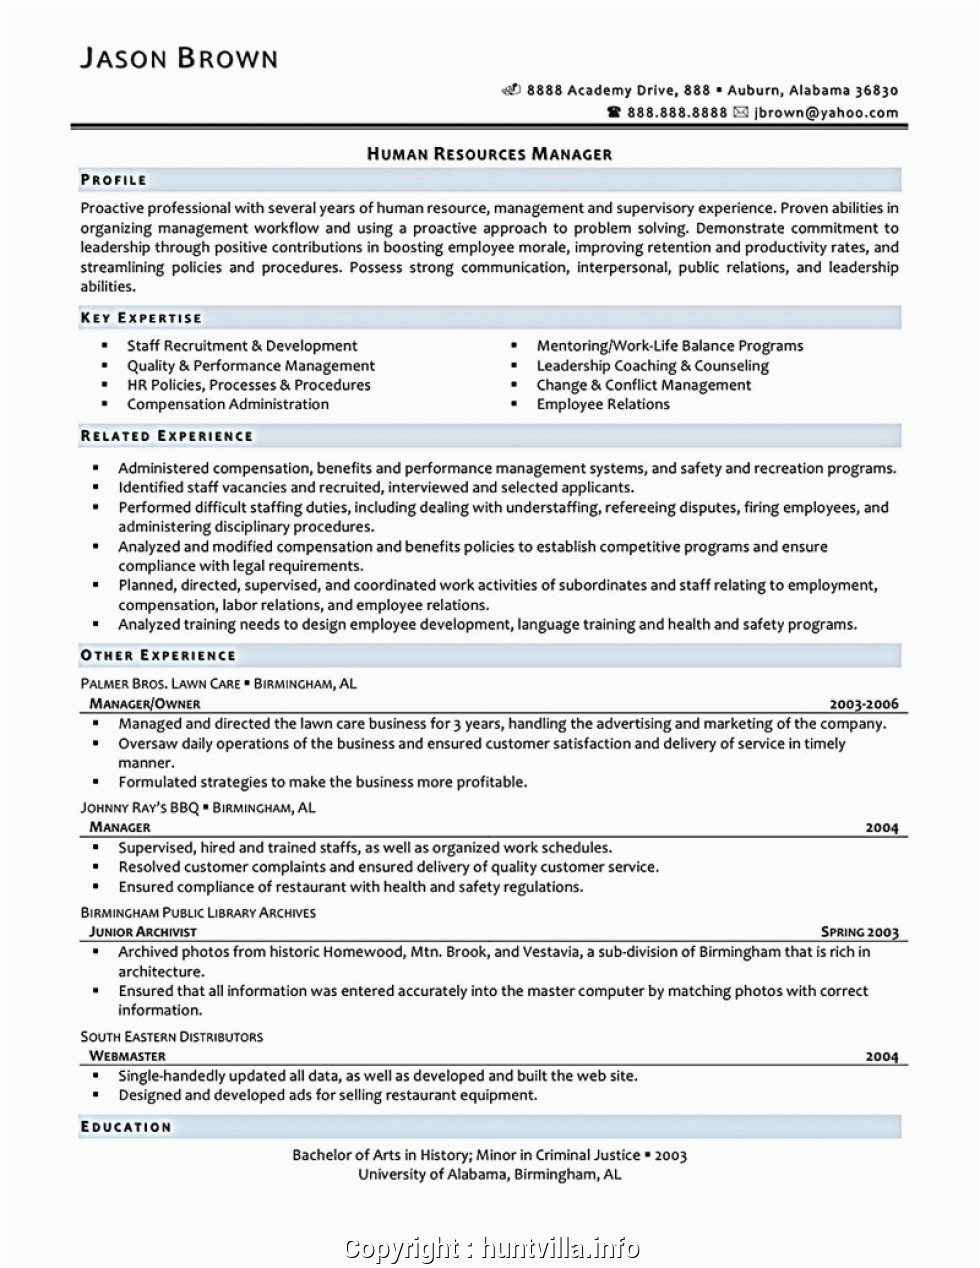 Entry Level Hr assistant Resume Sample Simply Human Resources assistant Cv Entry Level Human